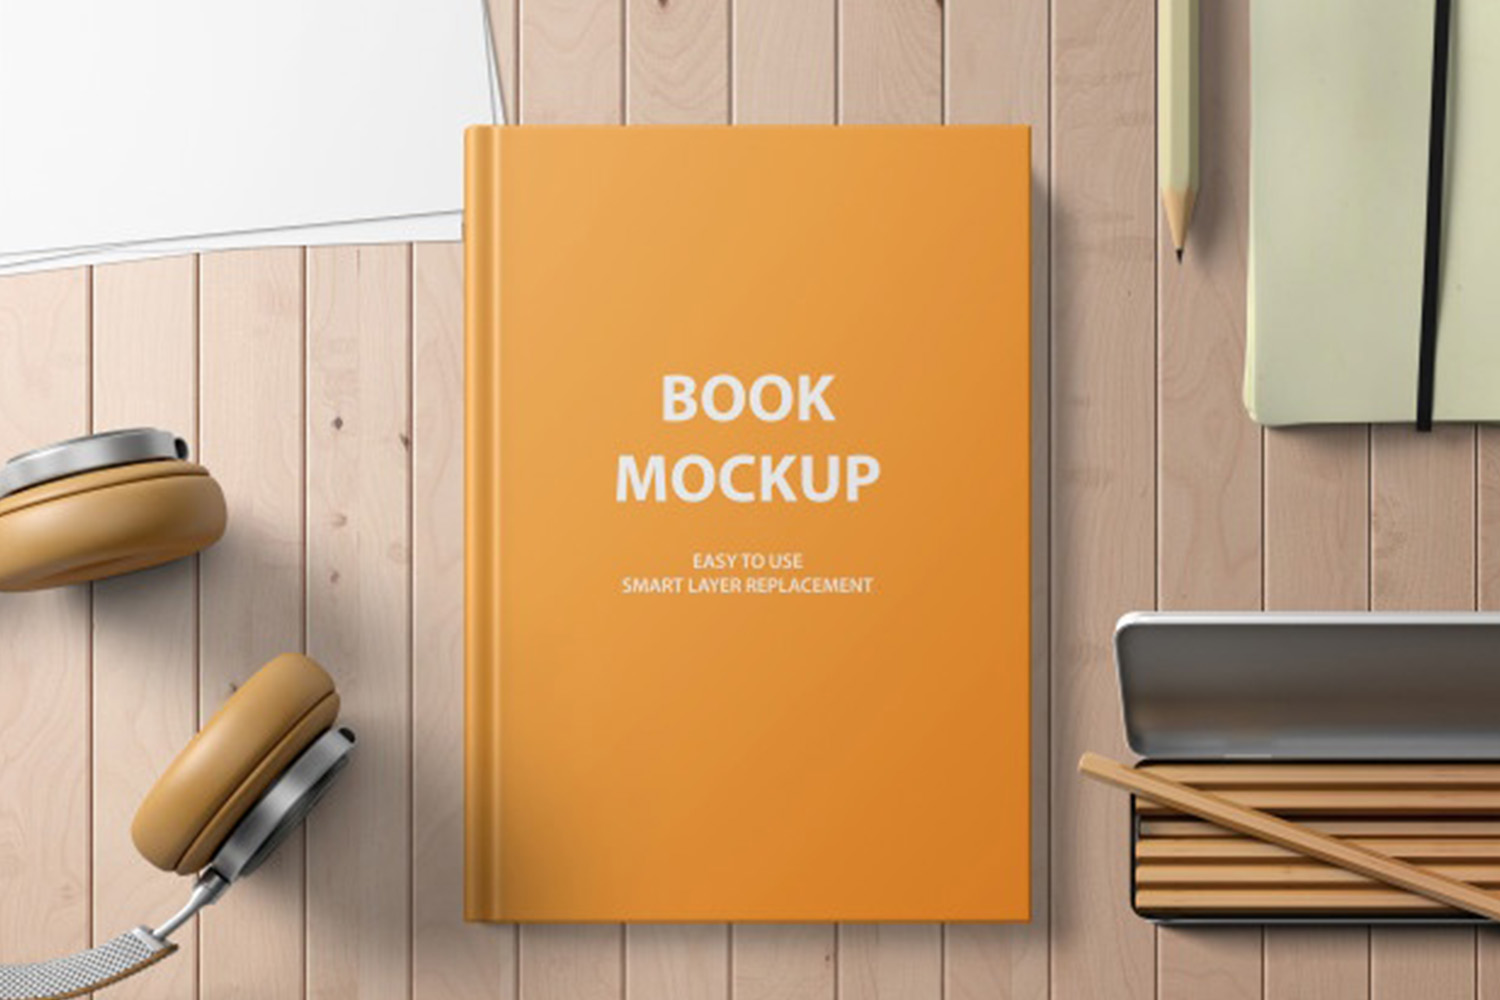 Hard Cover Book With Headphones And Pencils Mockup Free Download